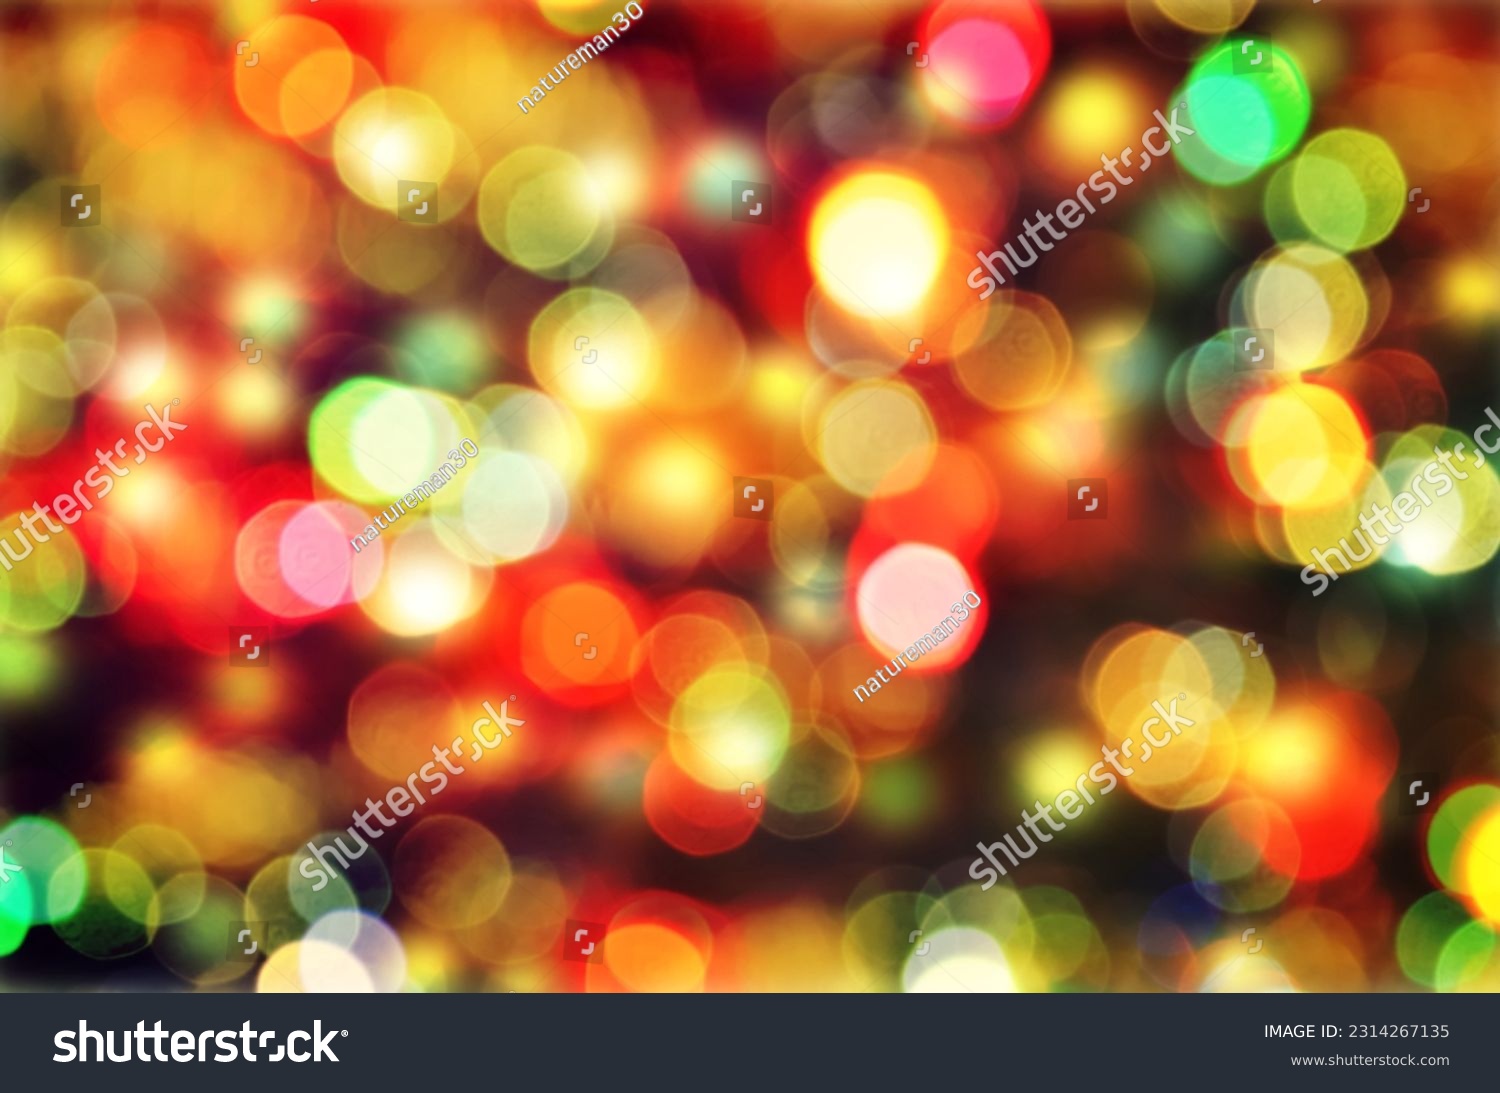 Colorful abstract background. Blurred and glowing colorful lights. #2314267135